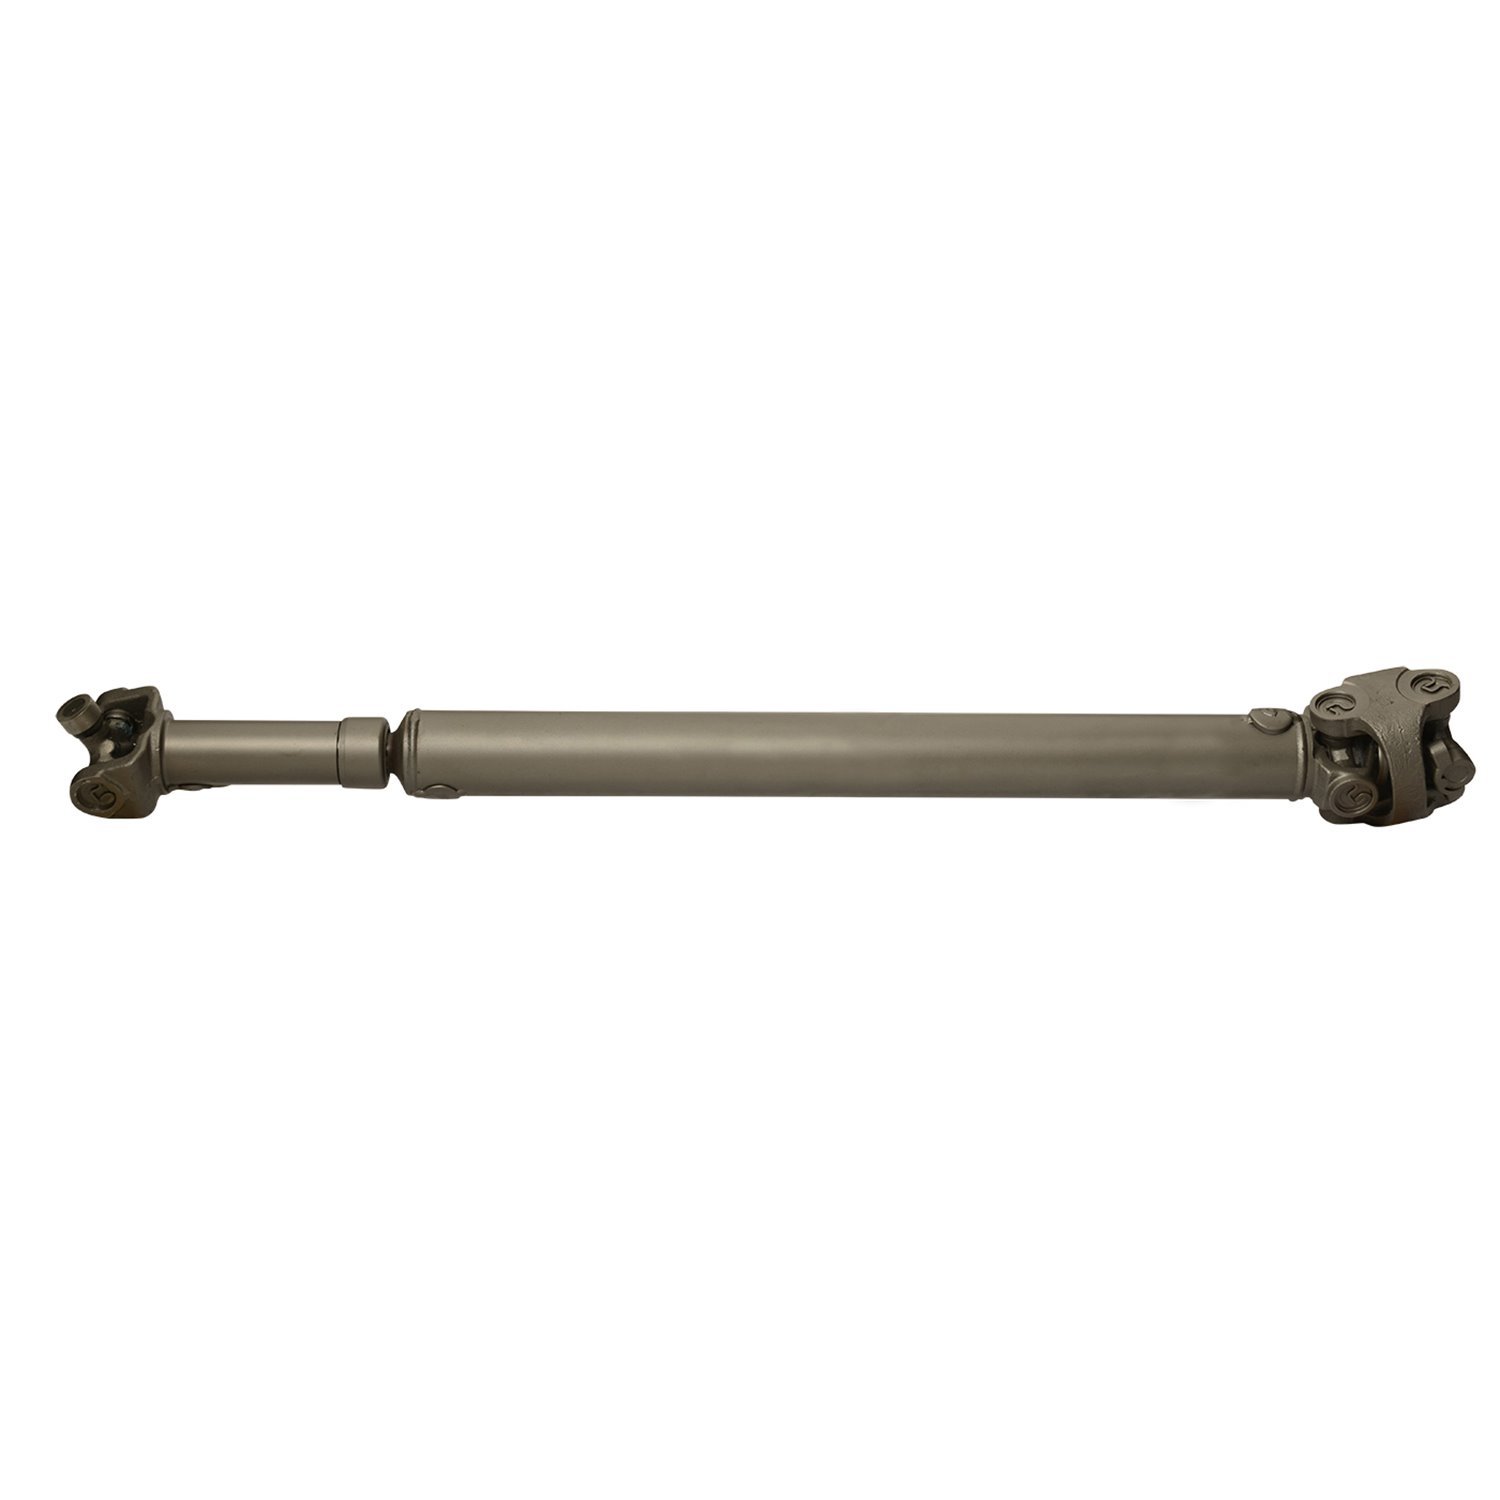 USA Standard ZDS9400 Rear Driveshaft, For Bronco, 26-1/2 in. Center-To-Center